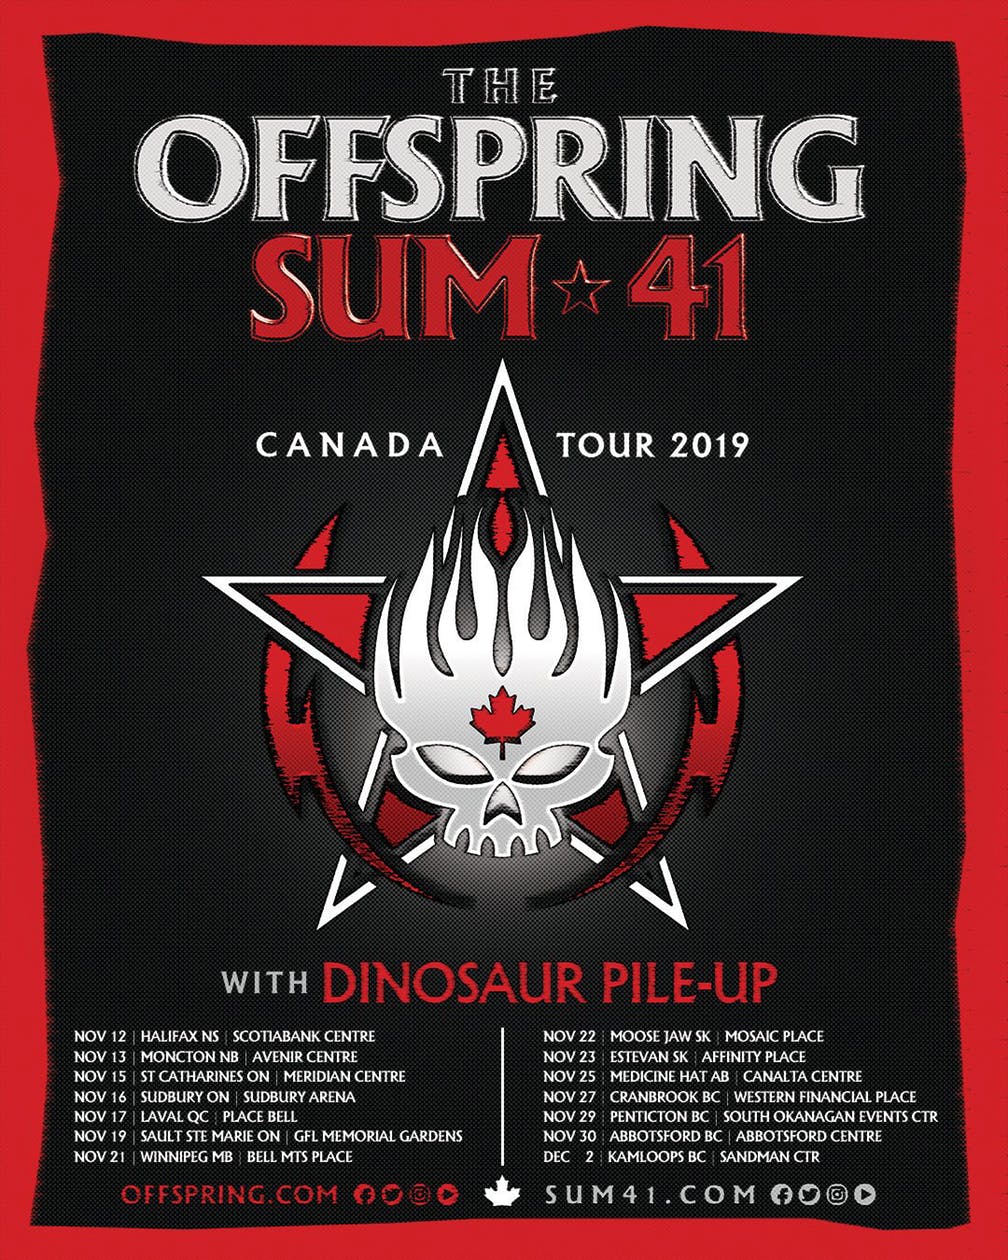 The Offspring & SUM 41 to Rock the Abbotsford Centre on November 30